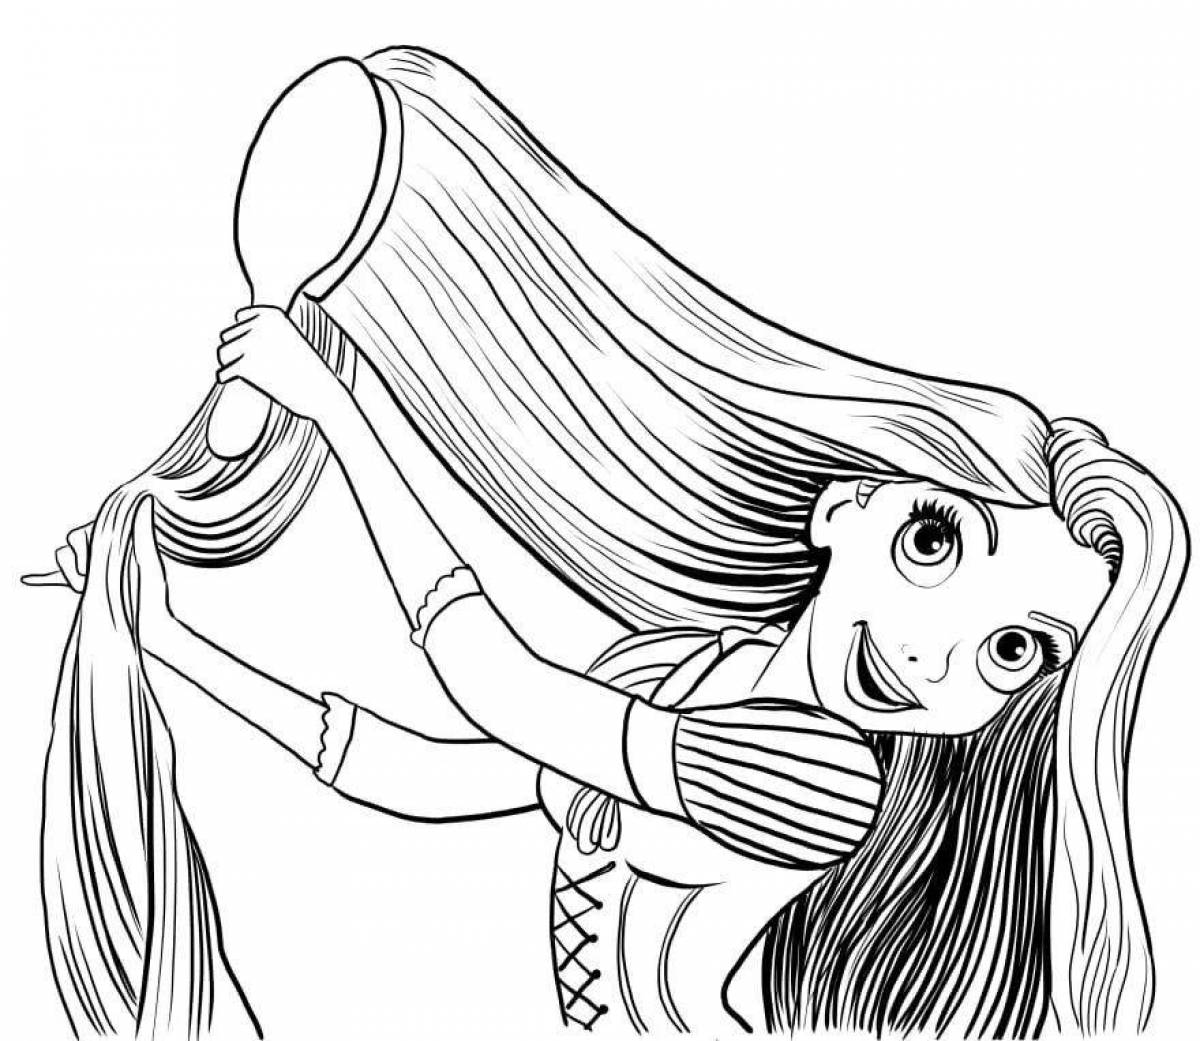 Fascinating coloring of a girl with long hair